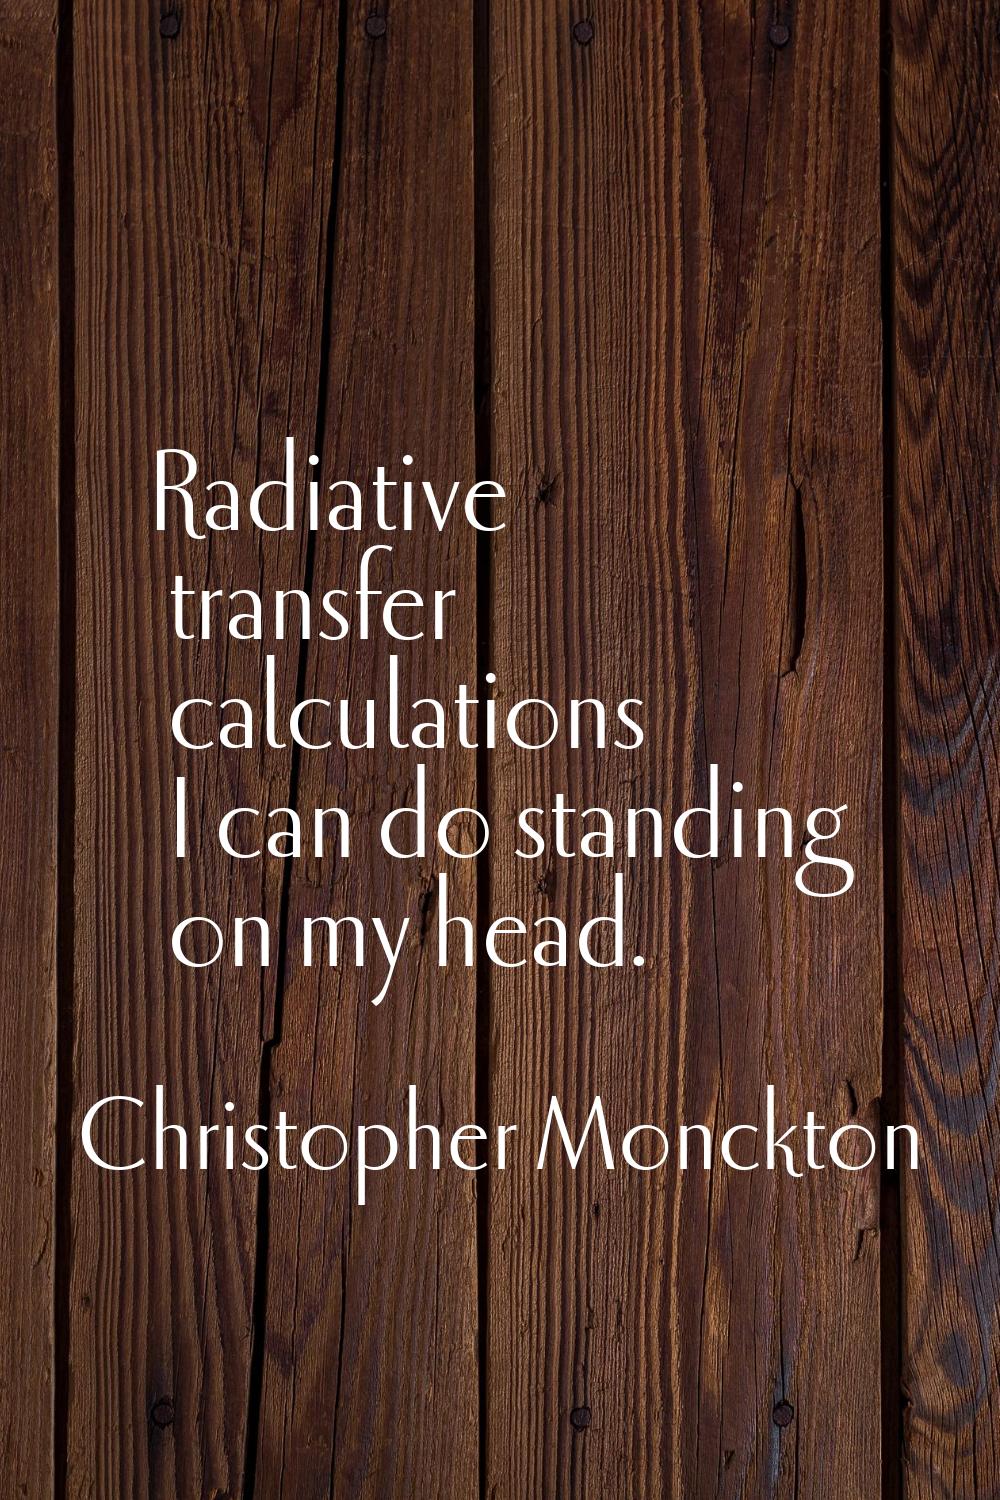 Radiative transfer calculations I can do standing on my head.